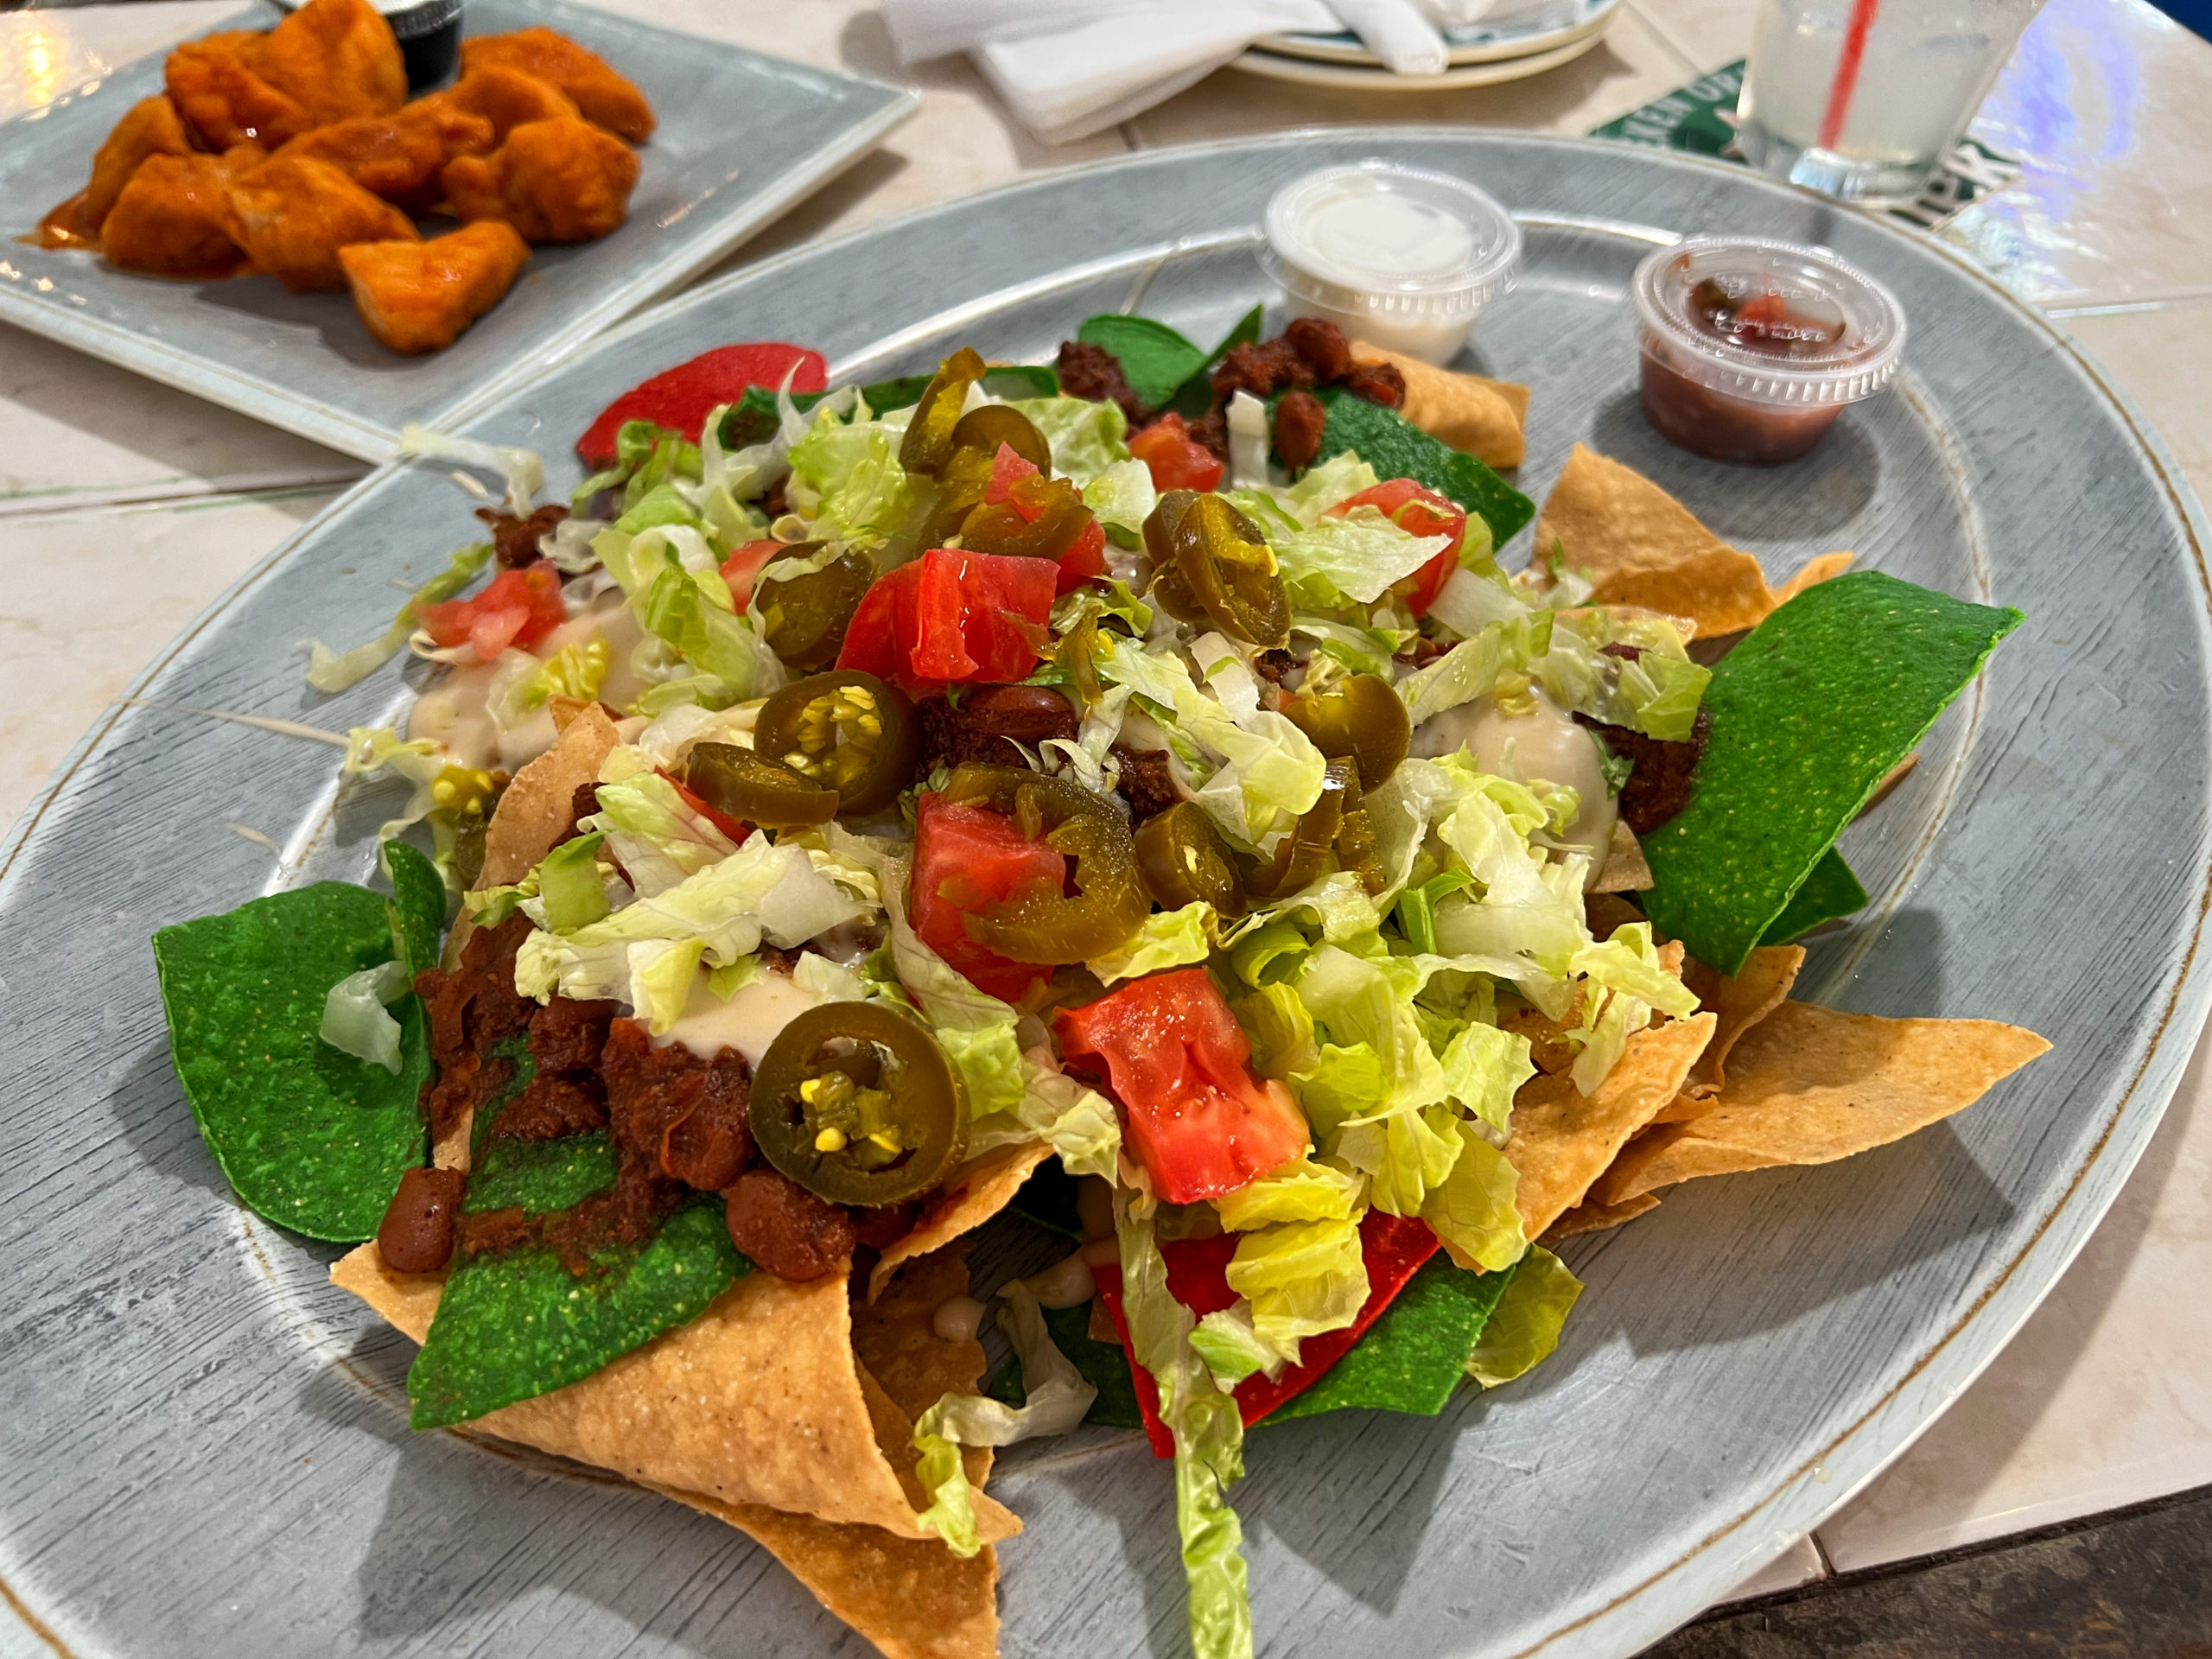 Appetizer nachos loaded with lettuce, tomato, queso, homeamde chili and jalapenos. Served with sour cream and salsa.